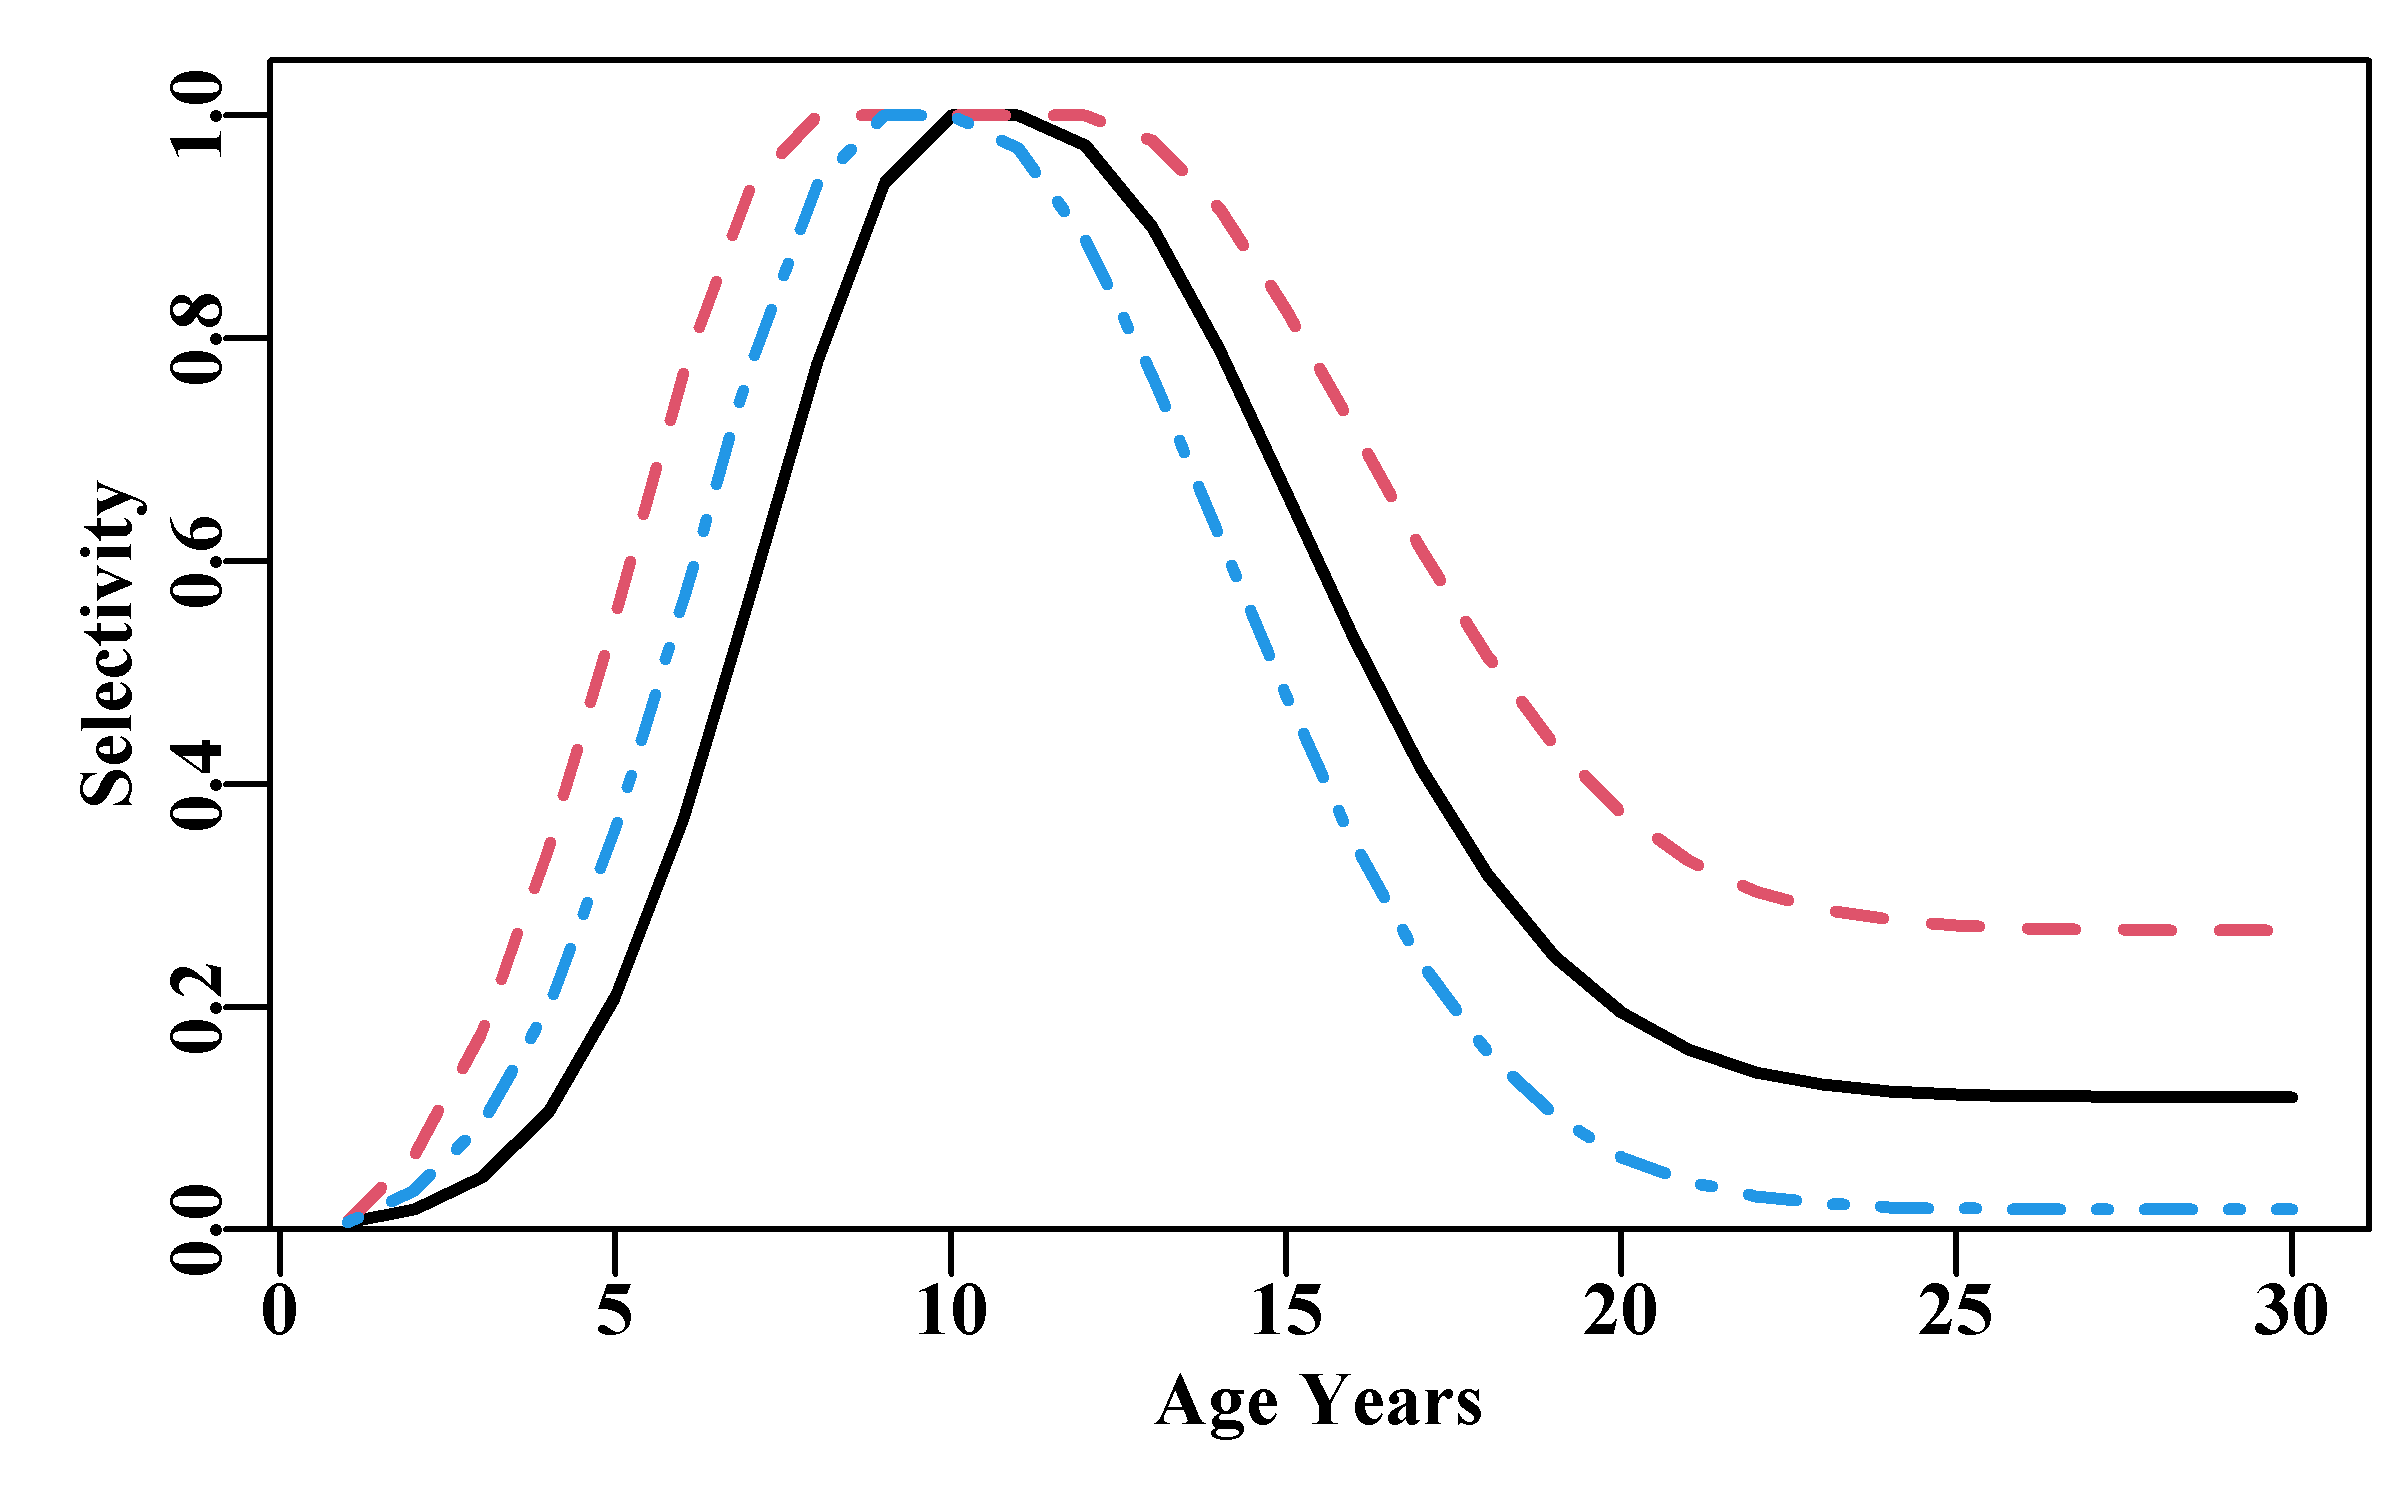 Three examples of domed-shaped selectivity curves produced by the function domed(), with changes to the initial age at achieving a selectivity of 1.0 (10, 8, 9), and the age (11, 12, 10) at which that stops, as well as the selectivity of the final age class.